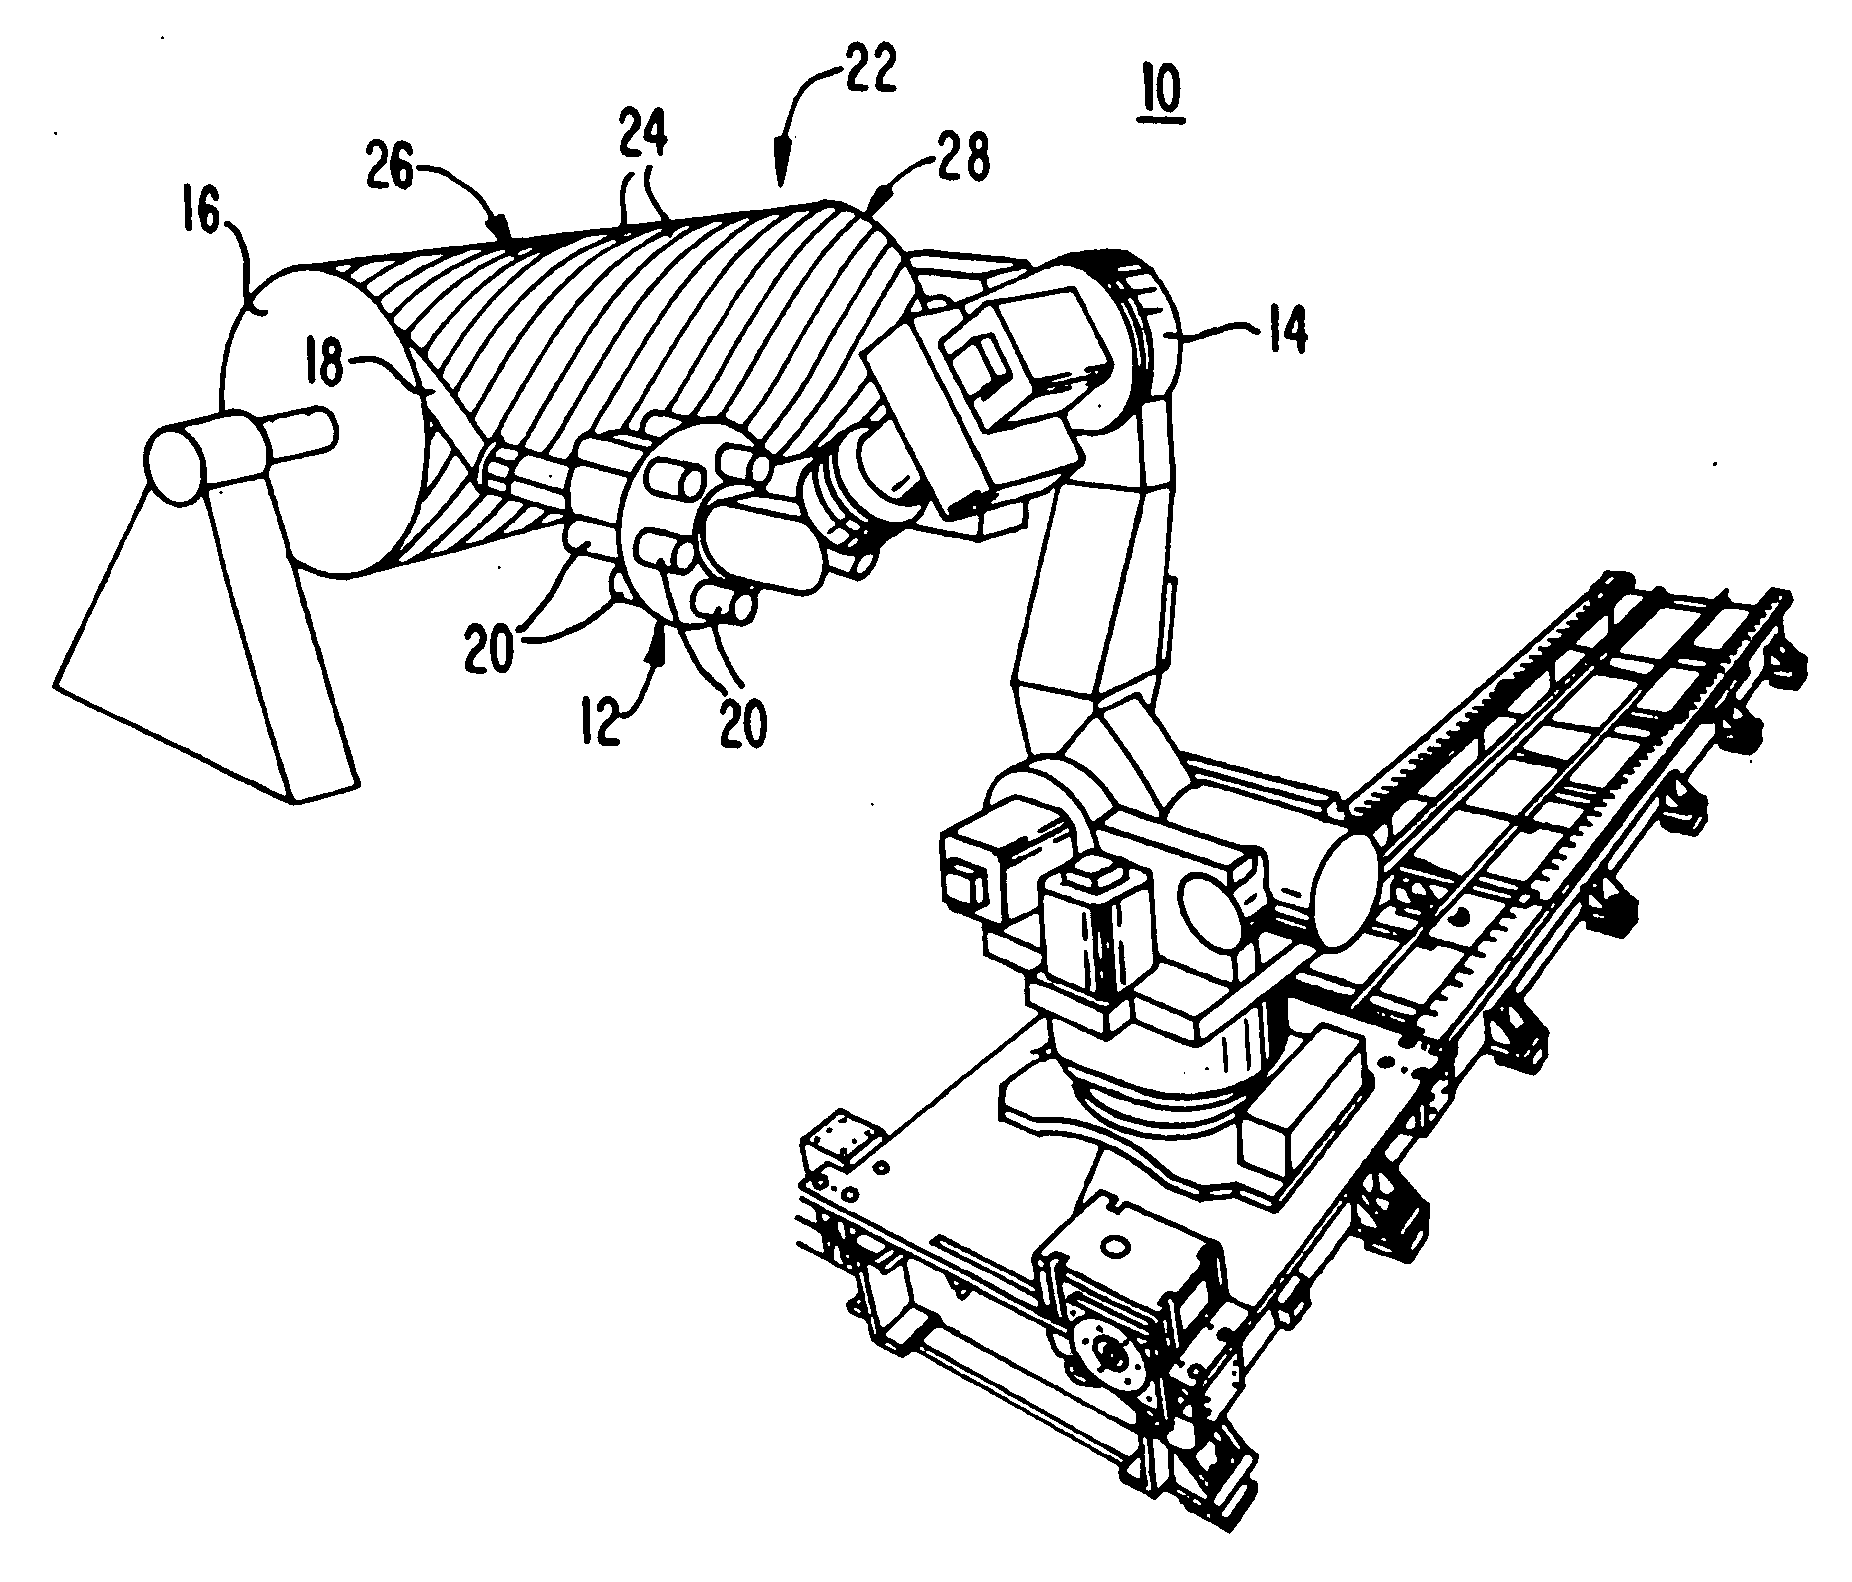 Tow width adaptable placement head device and method